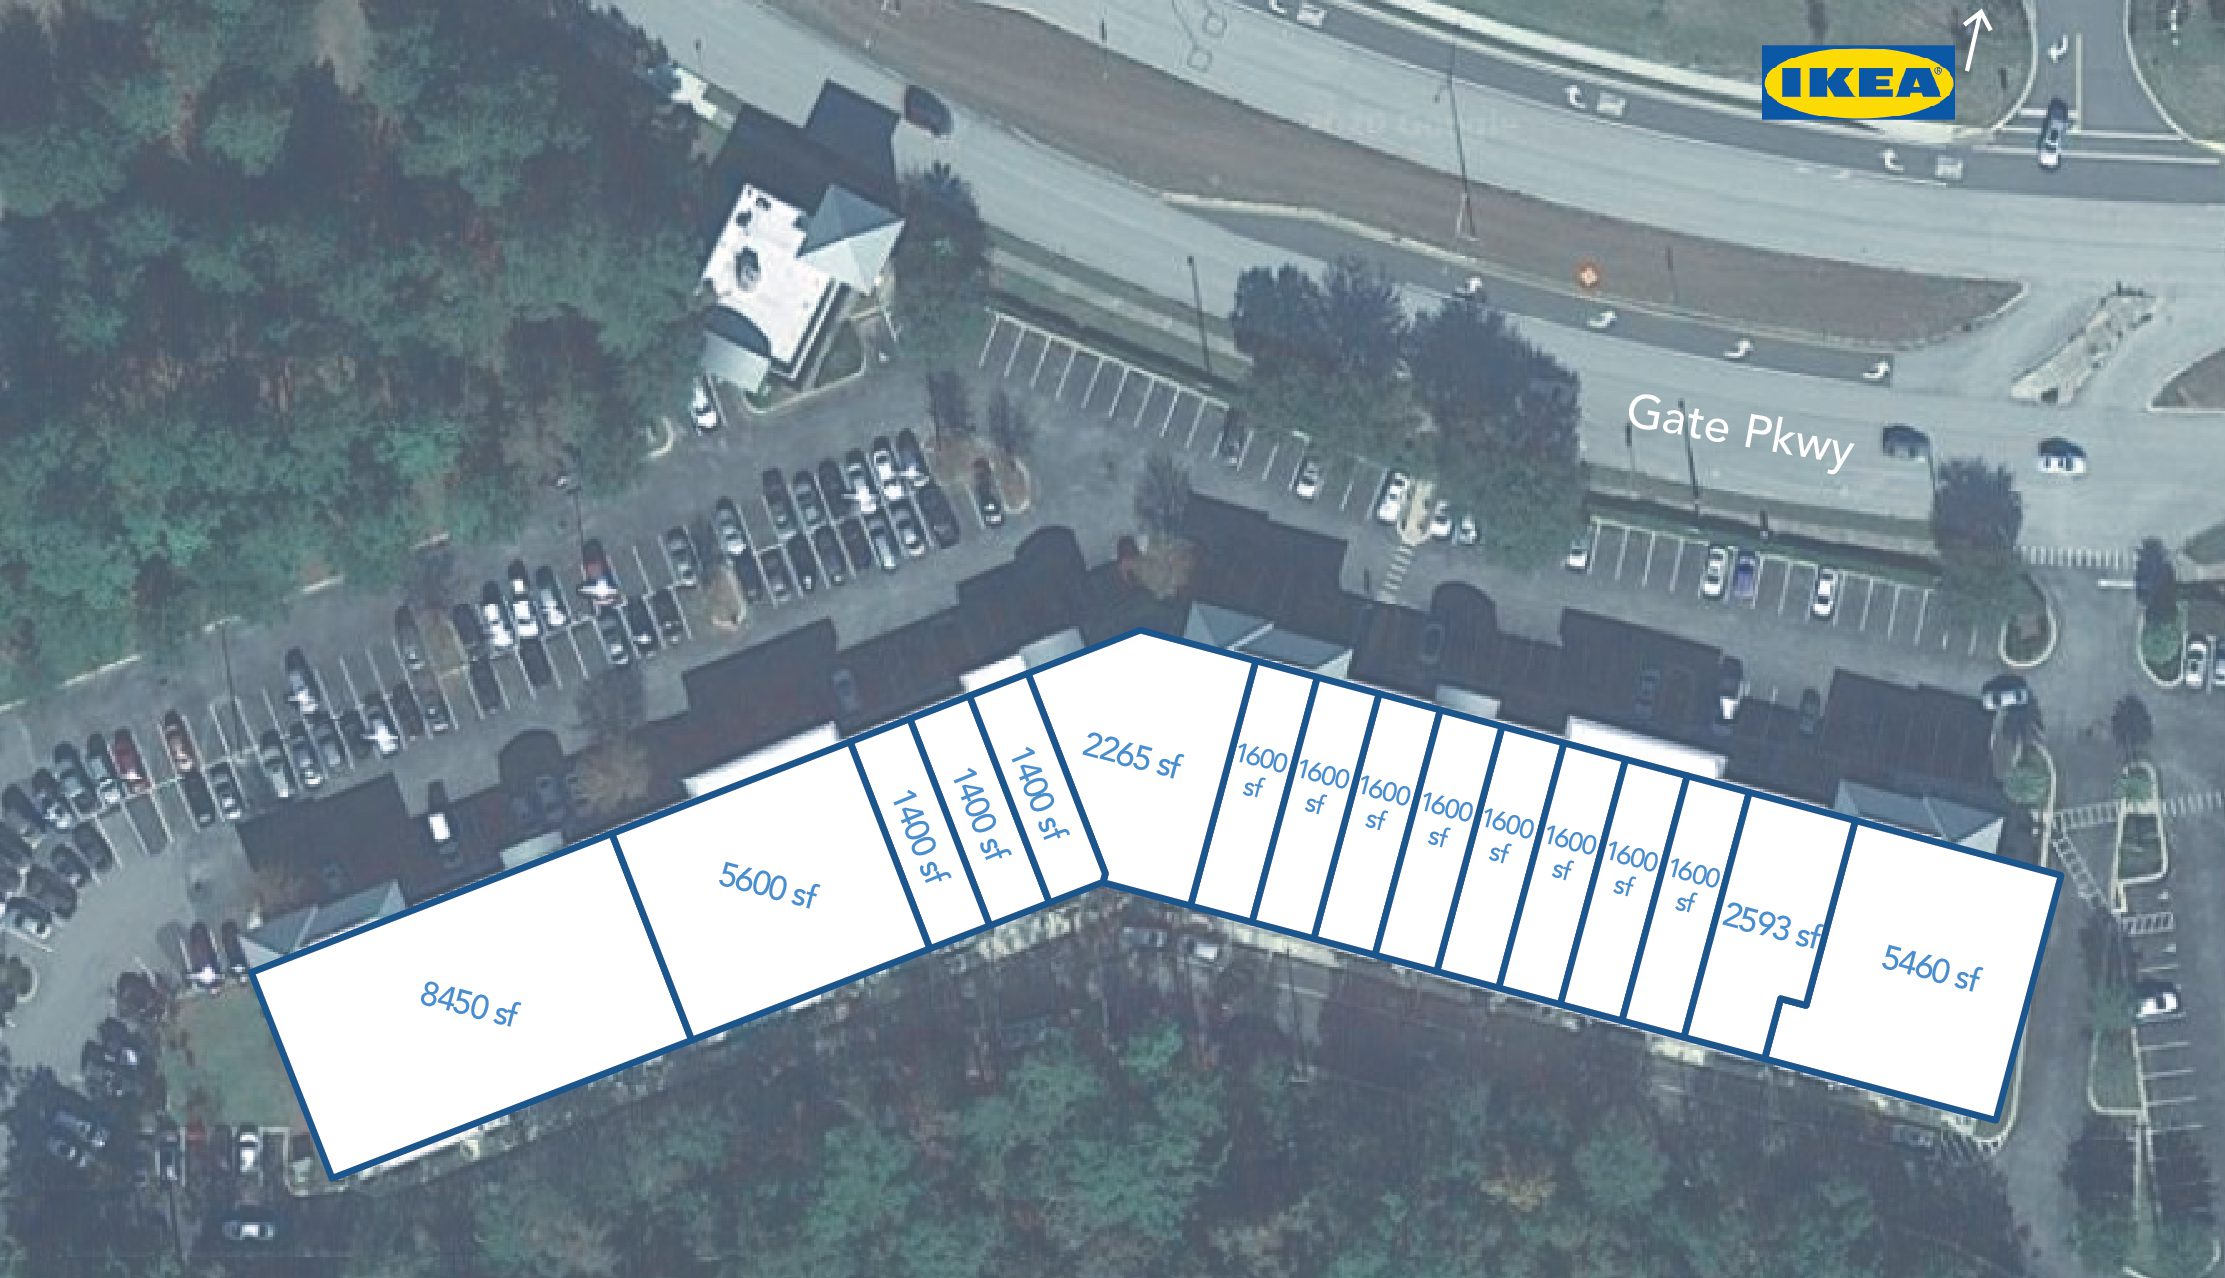 A site map depicting the layout of the property.